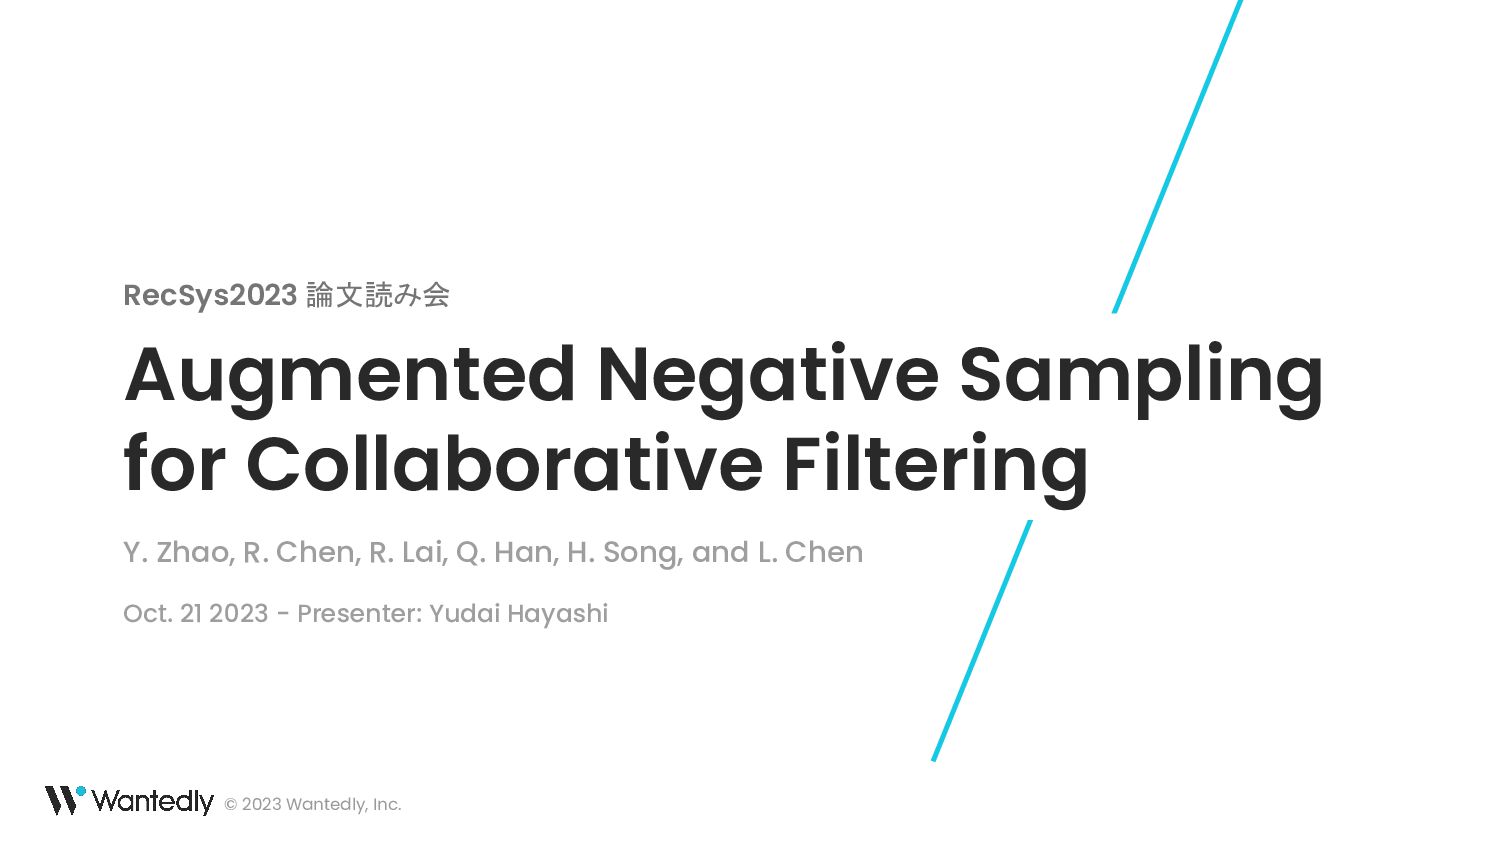 RecSys2023論文読み会 - Augmented Negative Sampling for Collaborative Filtering